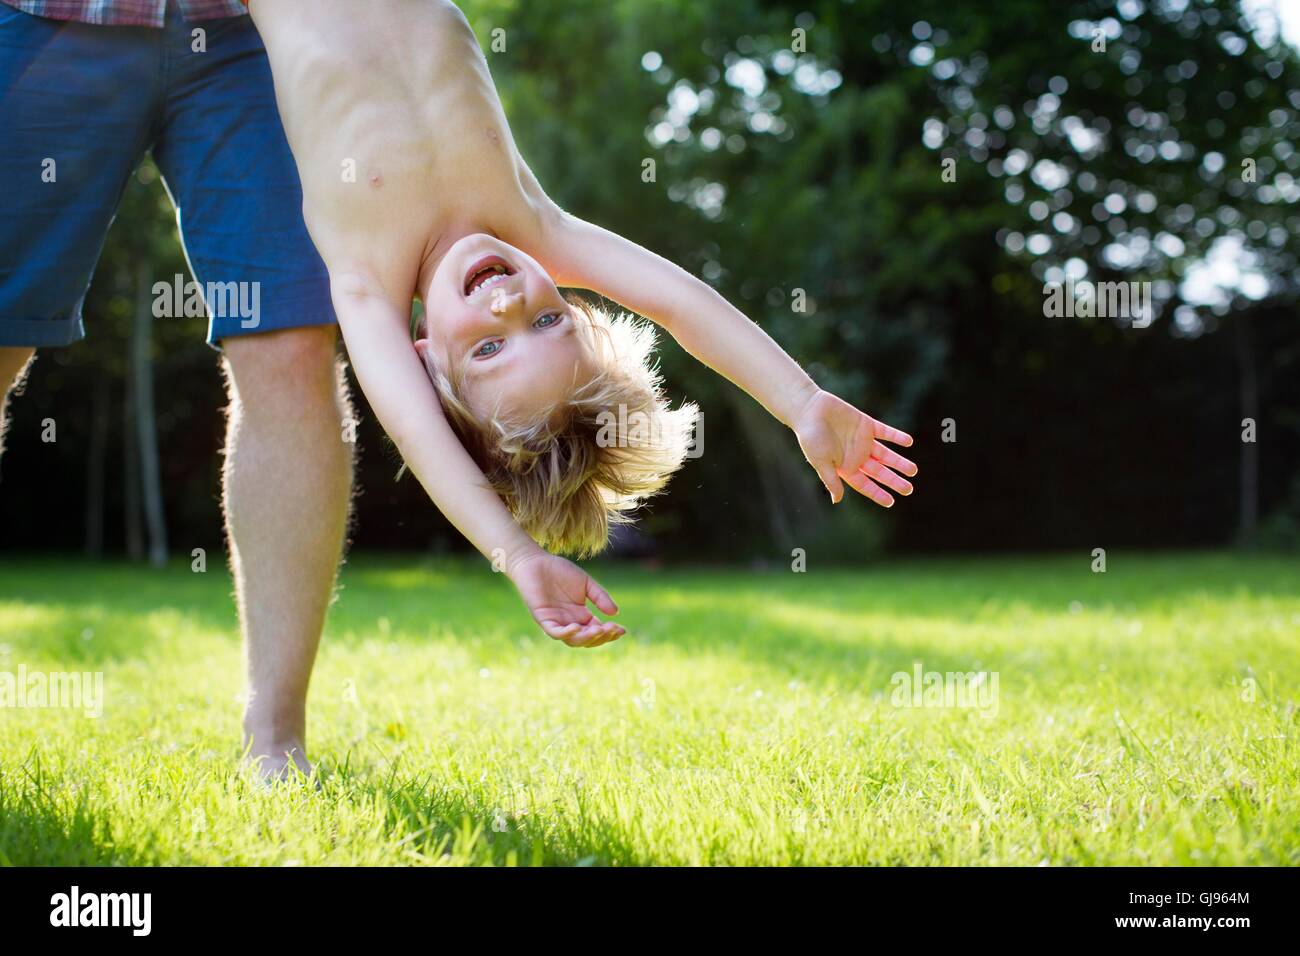 PROPERTY RELEASED. MODEL RELEASED. Father holding son upside down in the garden. Stock Photo